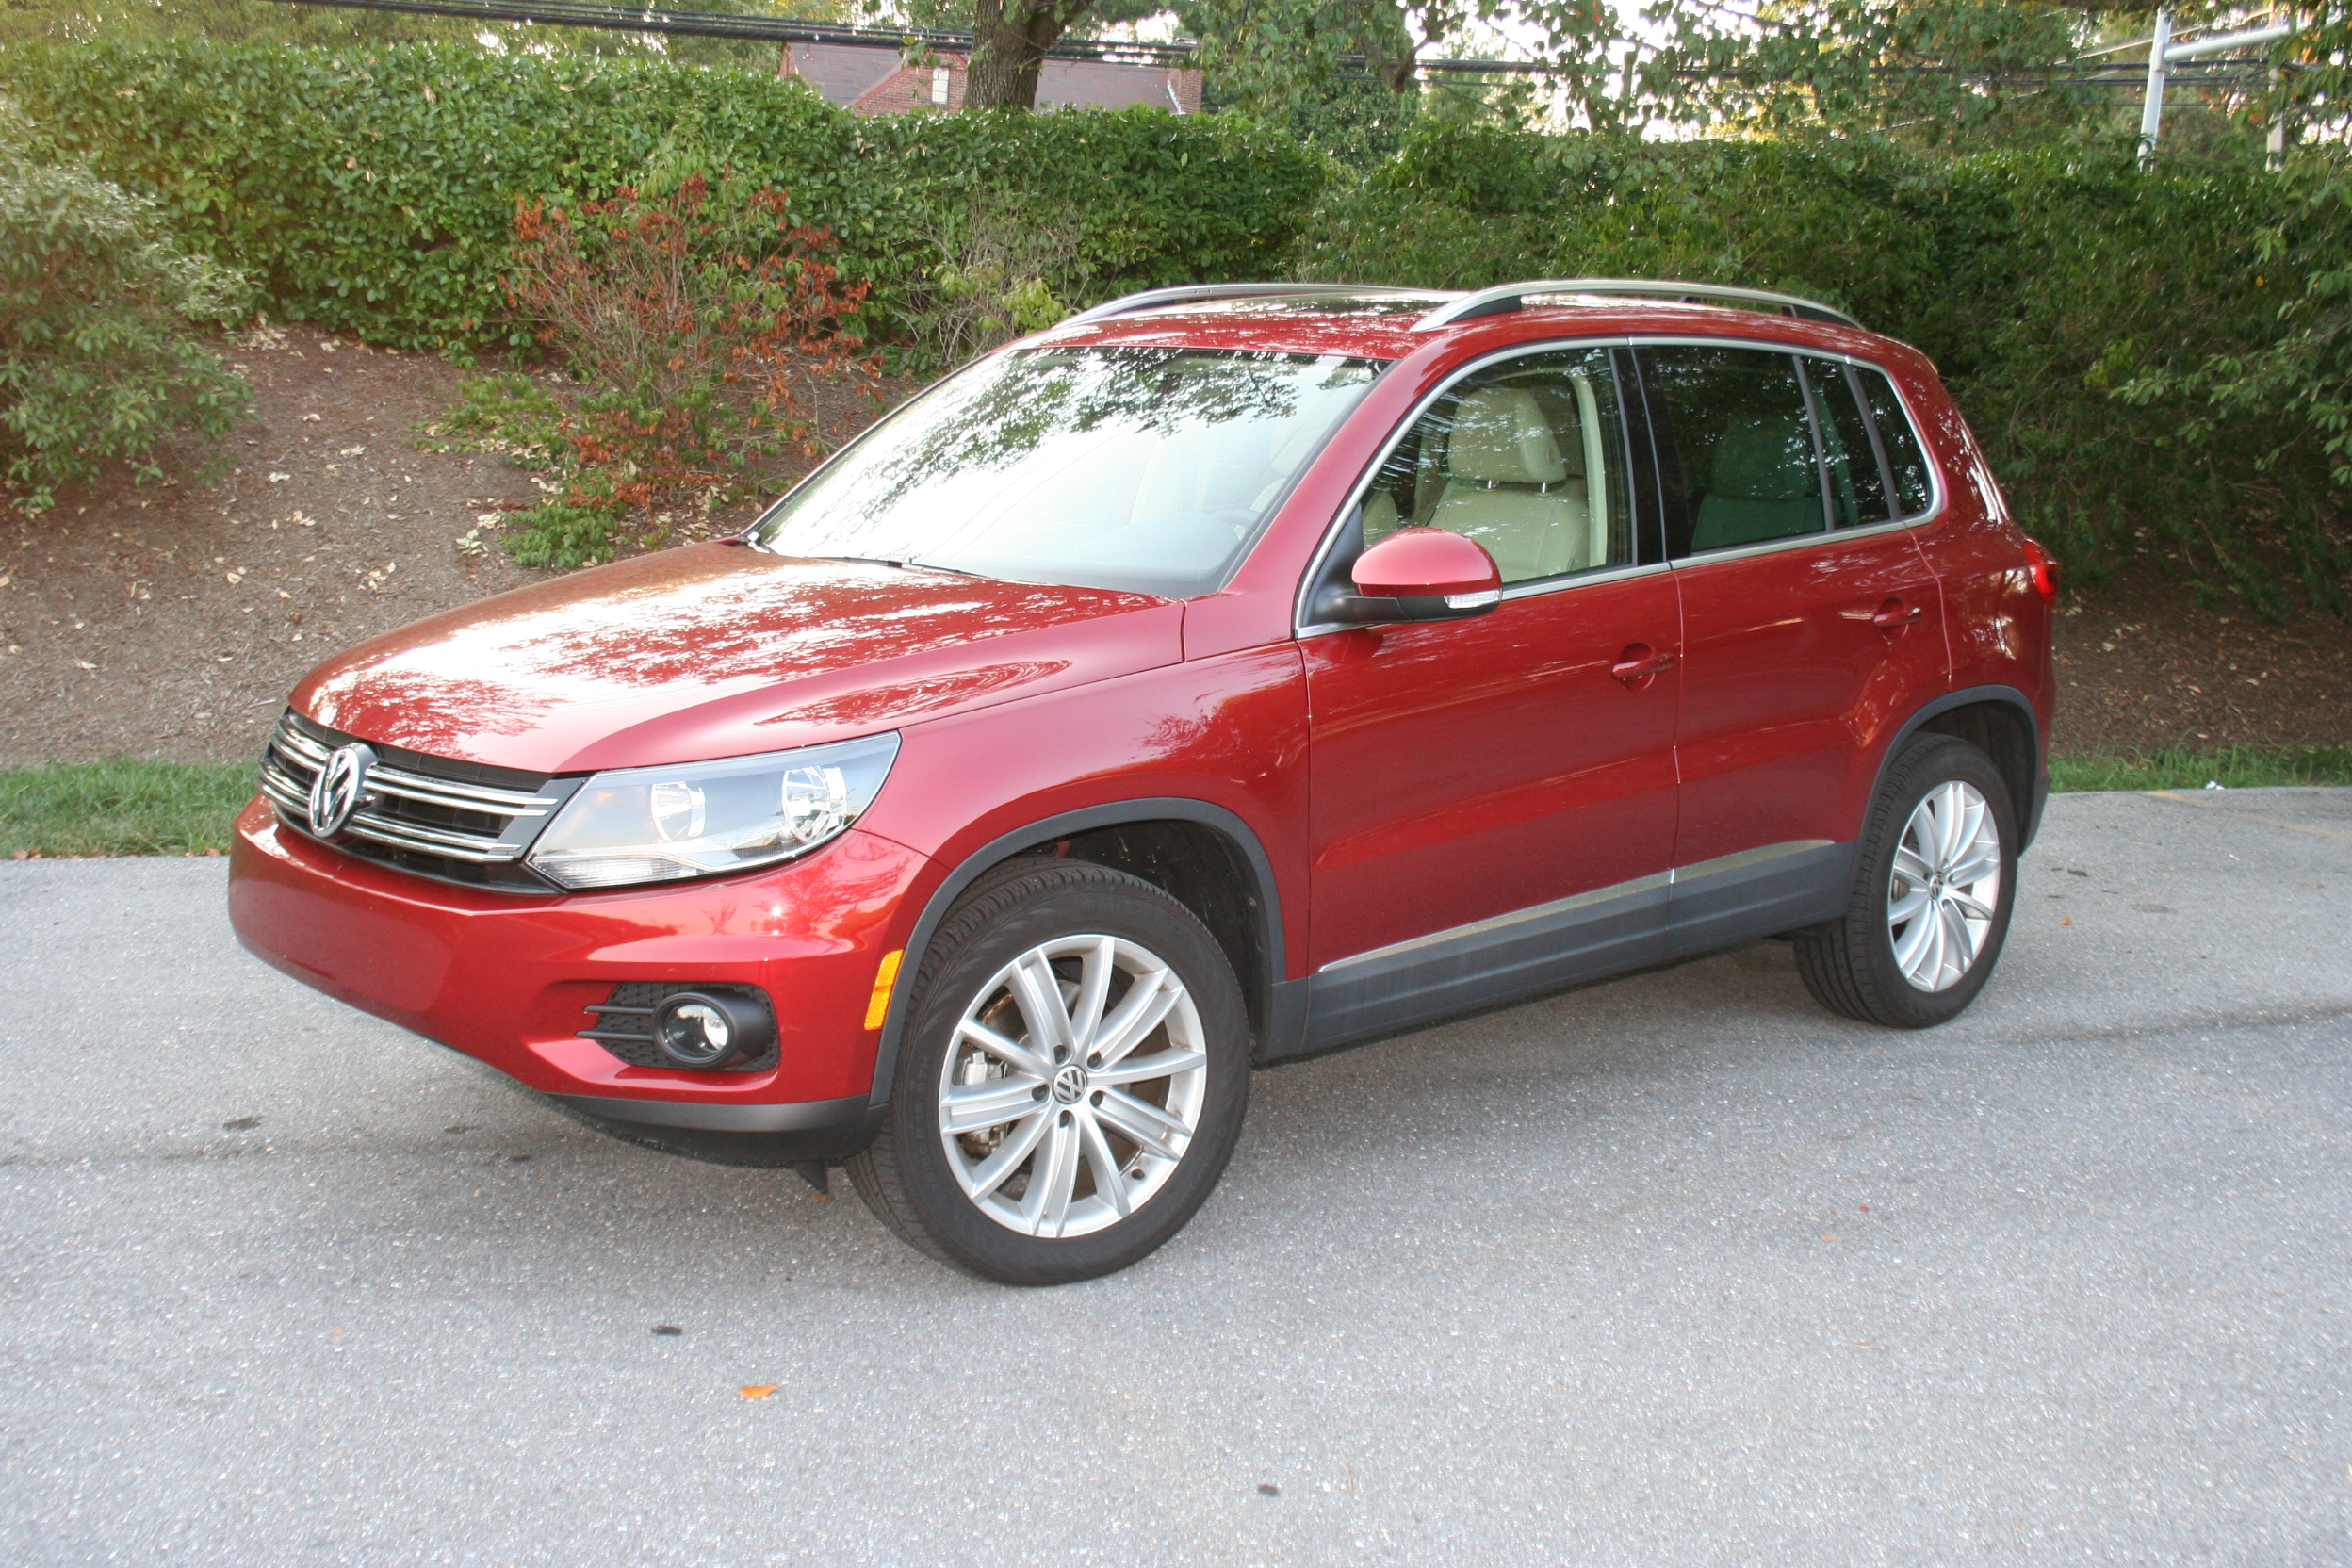 Volkswagen Tiguan: A compact crossover with an upscale look and feel